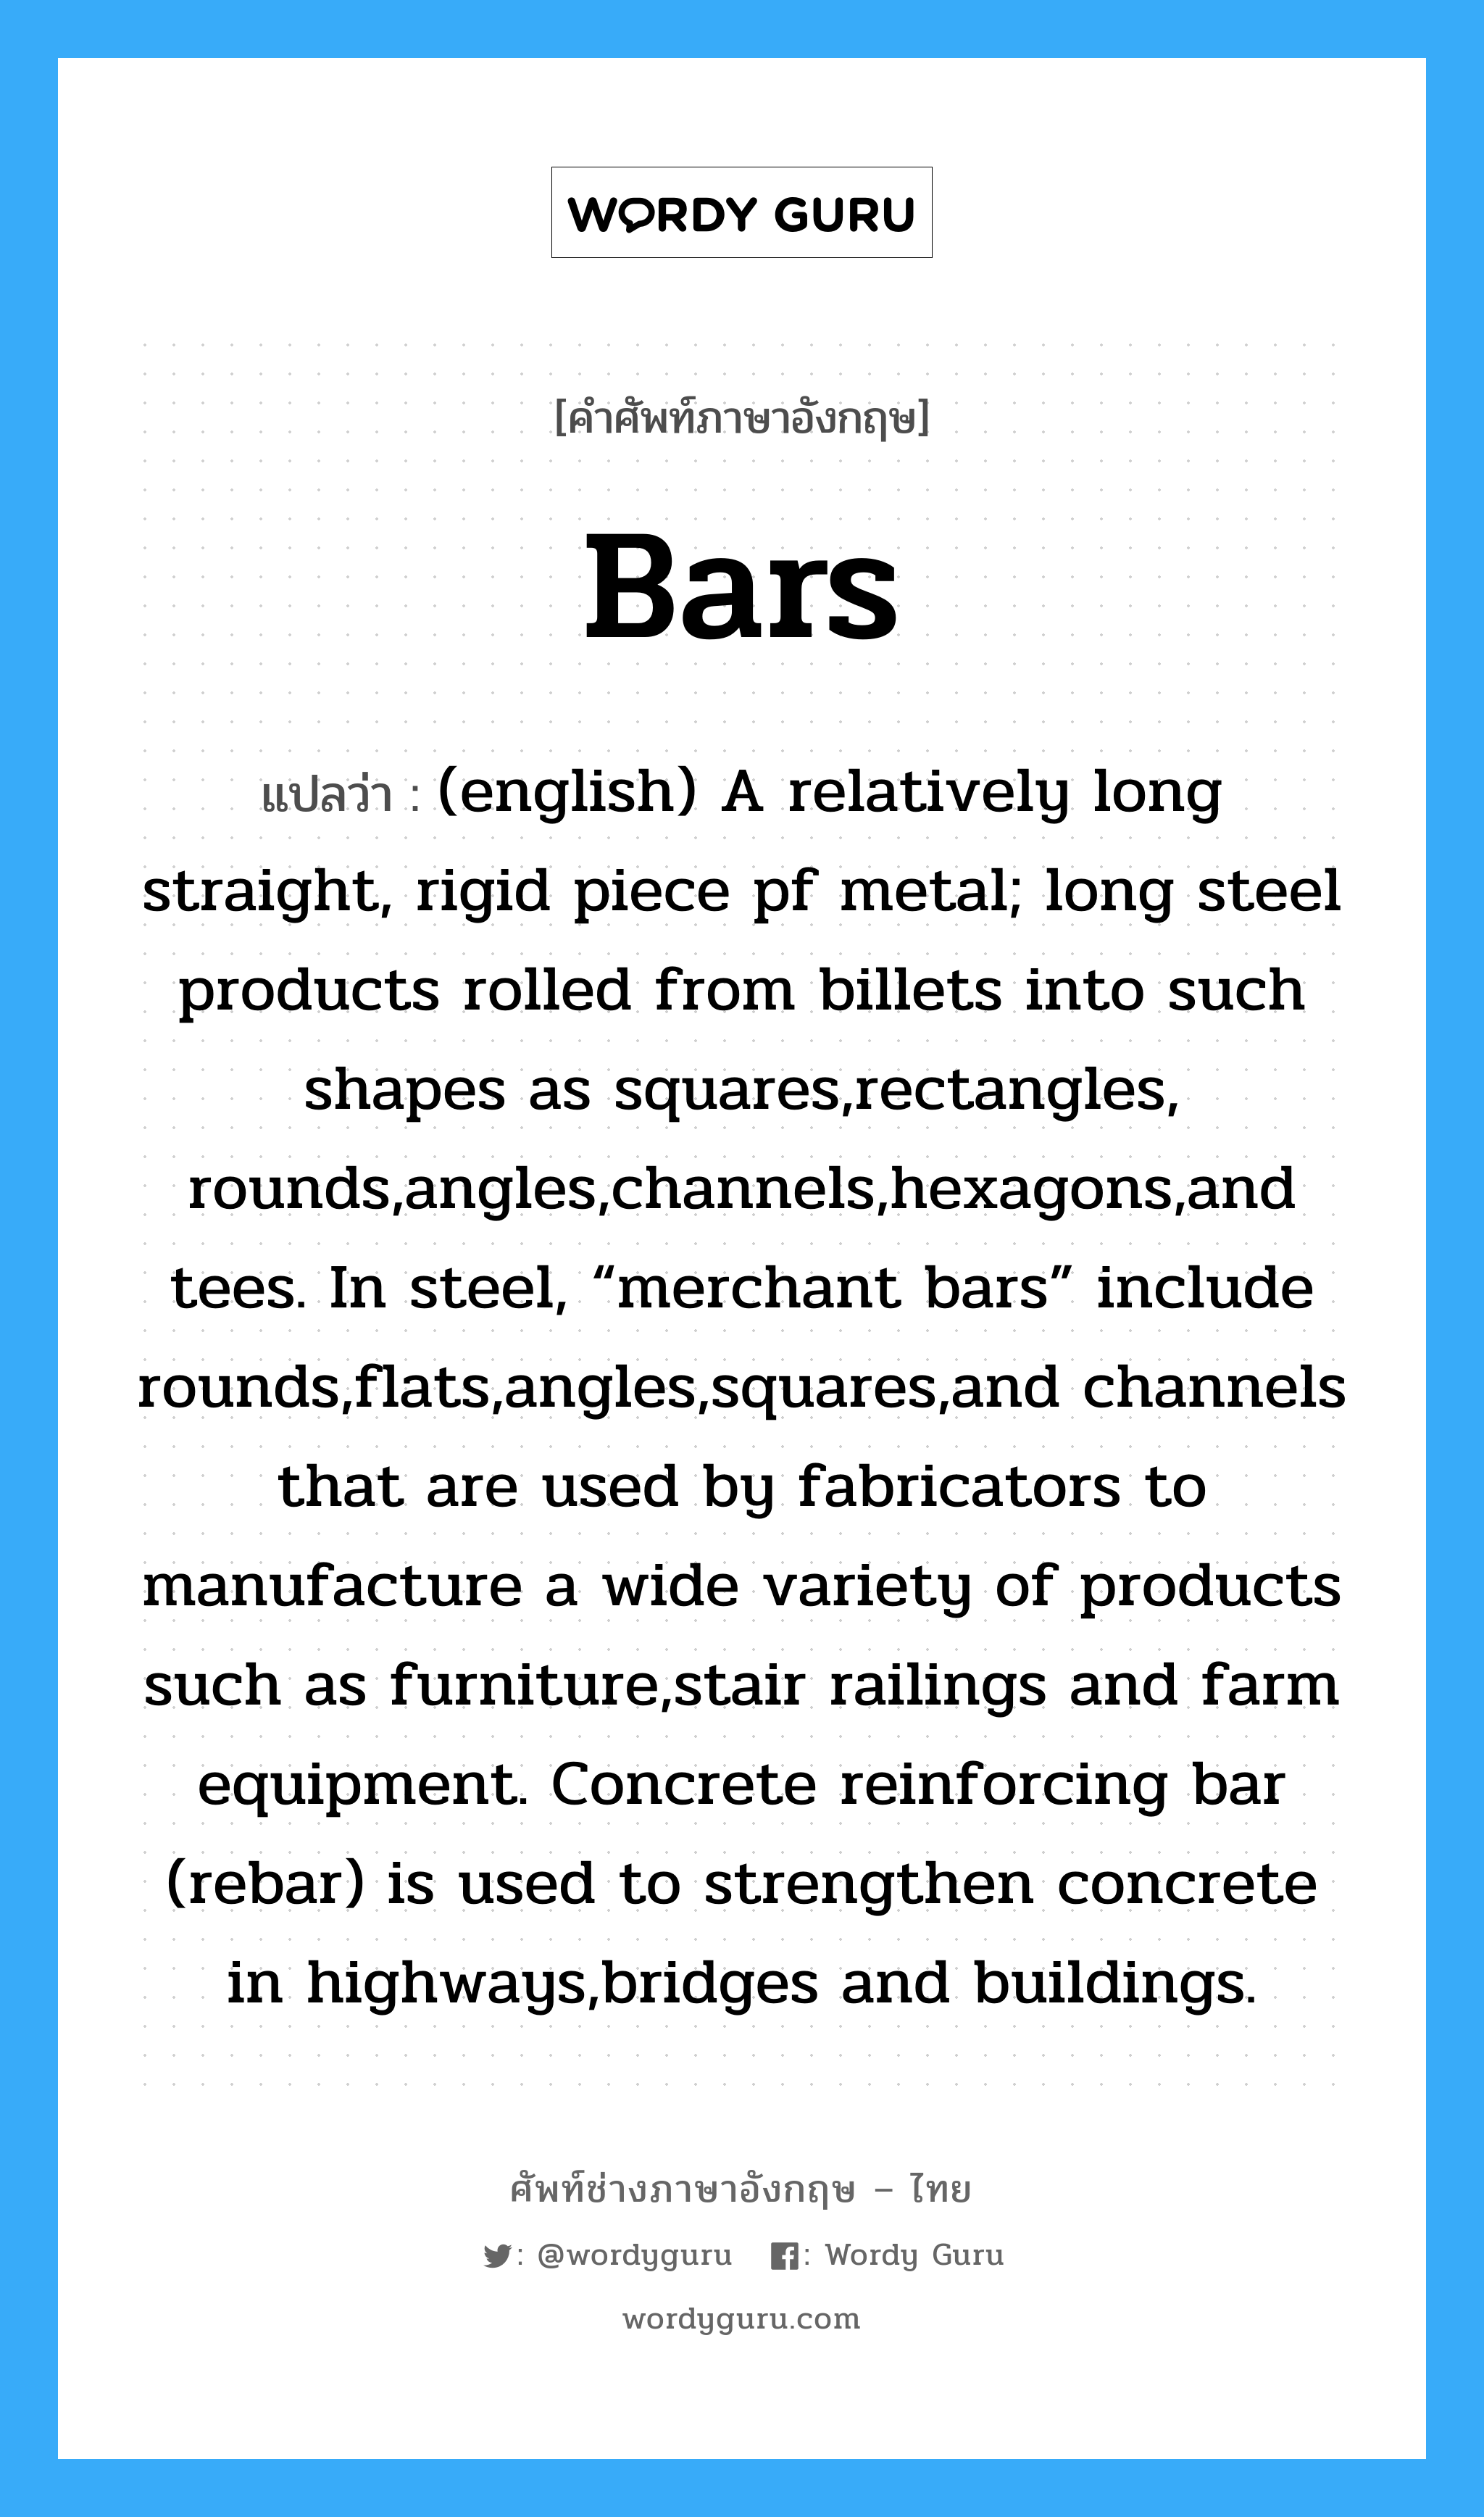 (english) A relatively long straight, rigid piece pf metal; long steel products rolled from billets into such shapes as squares,rectangles, rounds,angles,channels,hexagons,and tees. In steel, “merchant bars” include rounds,flats,angles,squares,and channels that are used by fabricators to manufacture a wide variety of products such as furniture,stair railings and farm equipment. Concrete reinforcing bar (rebar) is used to strengthen concrete in highways,bridges and buildings. ภาษาอังกฤษ?, คำศัพท์ช่างภาษาอังกฤษ - ไทย (english) A relatively long straight, rigid piece pf metal; long steel products rolled from billets into such shapes as squares,rectangles, rounds,angles,channels,hexagons,and tees. In steel, “merchant bars” include rounds,flats,angles,squares,and channels that are used by fabricators to manufacture a wide variety of products such as furniture,stair railings and farm equipment. Concrete reinforcing bar (rebar) is used to strengthen concrete in highways,bridges and buildings. คำศัพท์ภาษาอังกฤษ (english) A relatively long straight, rigid piece pf metal; long steel products rolled from billets into such shapes as squares,rectangles, rounds,angles,channels,hexagons,and tees. In steel, “merchant bars” include rounds,flats,angles,squares,and channels that are used by fabricators to manufacture a wide variety of products such as furniture,stair railings and farm equipment. Concrete reinforcing bar (rebar) is used to strengthen concrete in highways,bridges and buildings. แปลว่า Bars